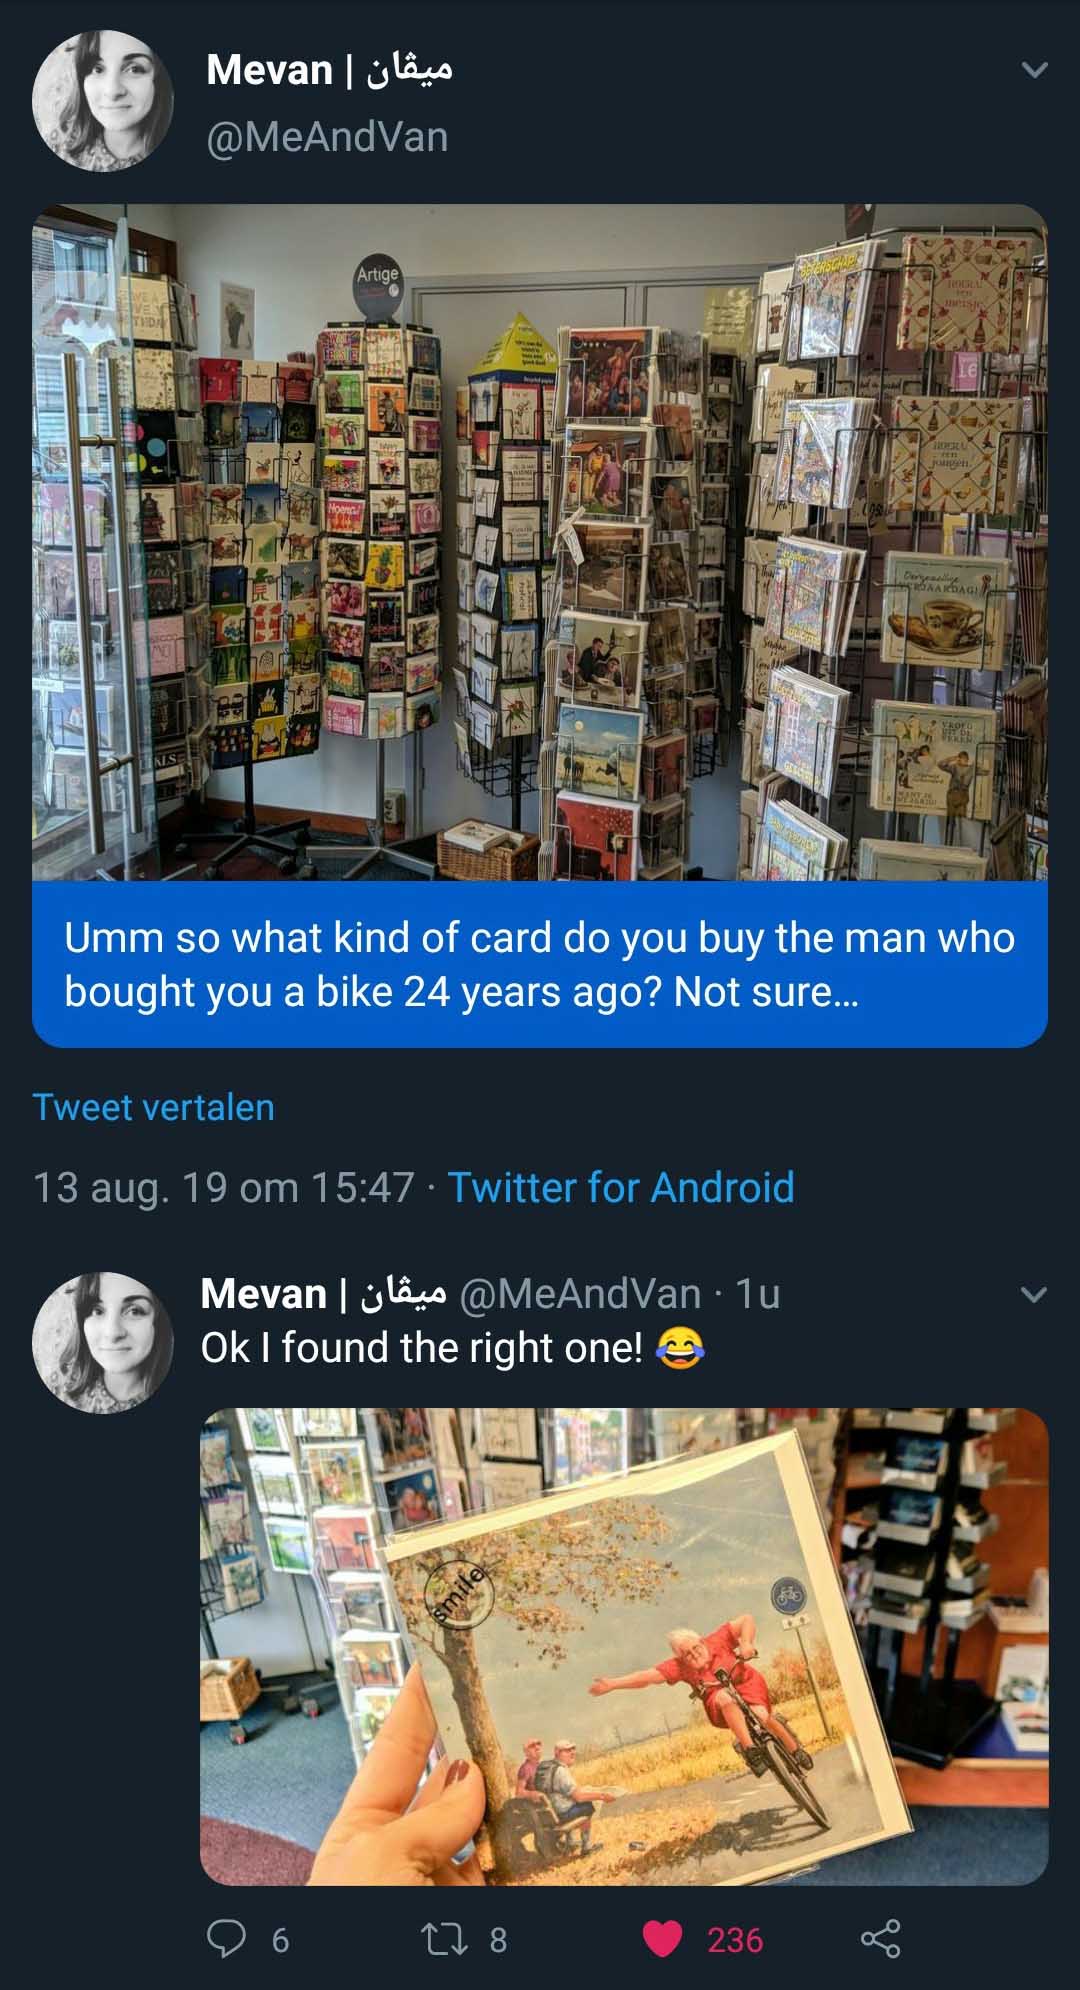 Mevan Artige Raicach Umm so what kind of card do you buy the man who bought you a bike 24 years ago? Not sure... Tweet vertalen 13 aug. 19 om Twitter for Android Mevan lilus 1u Ok I found the right one! 26 278 236 8